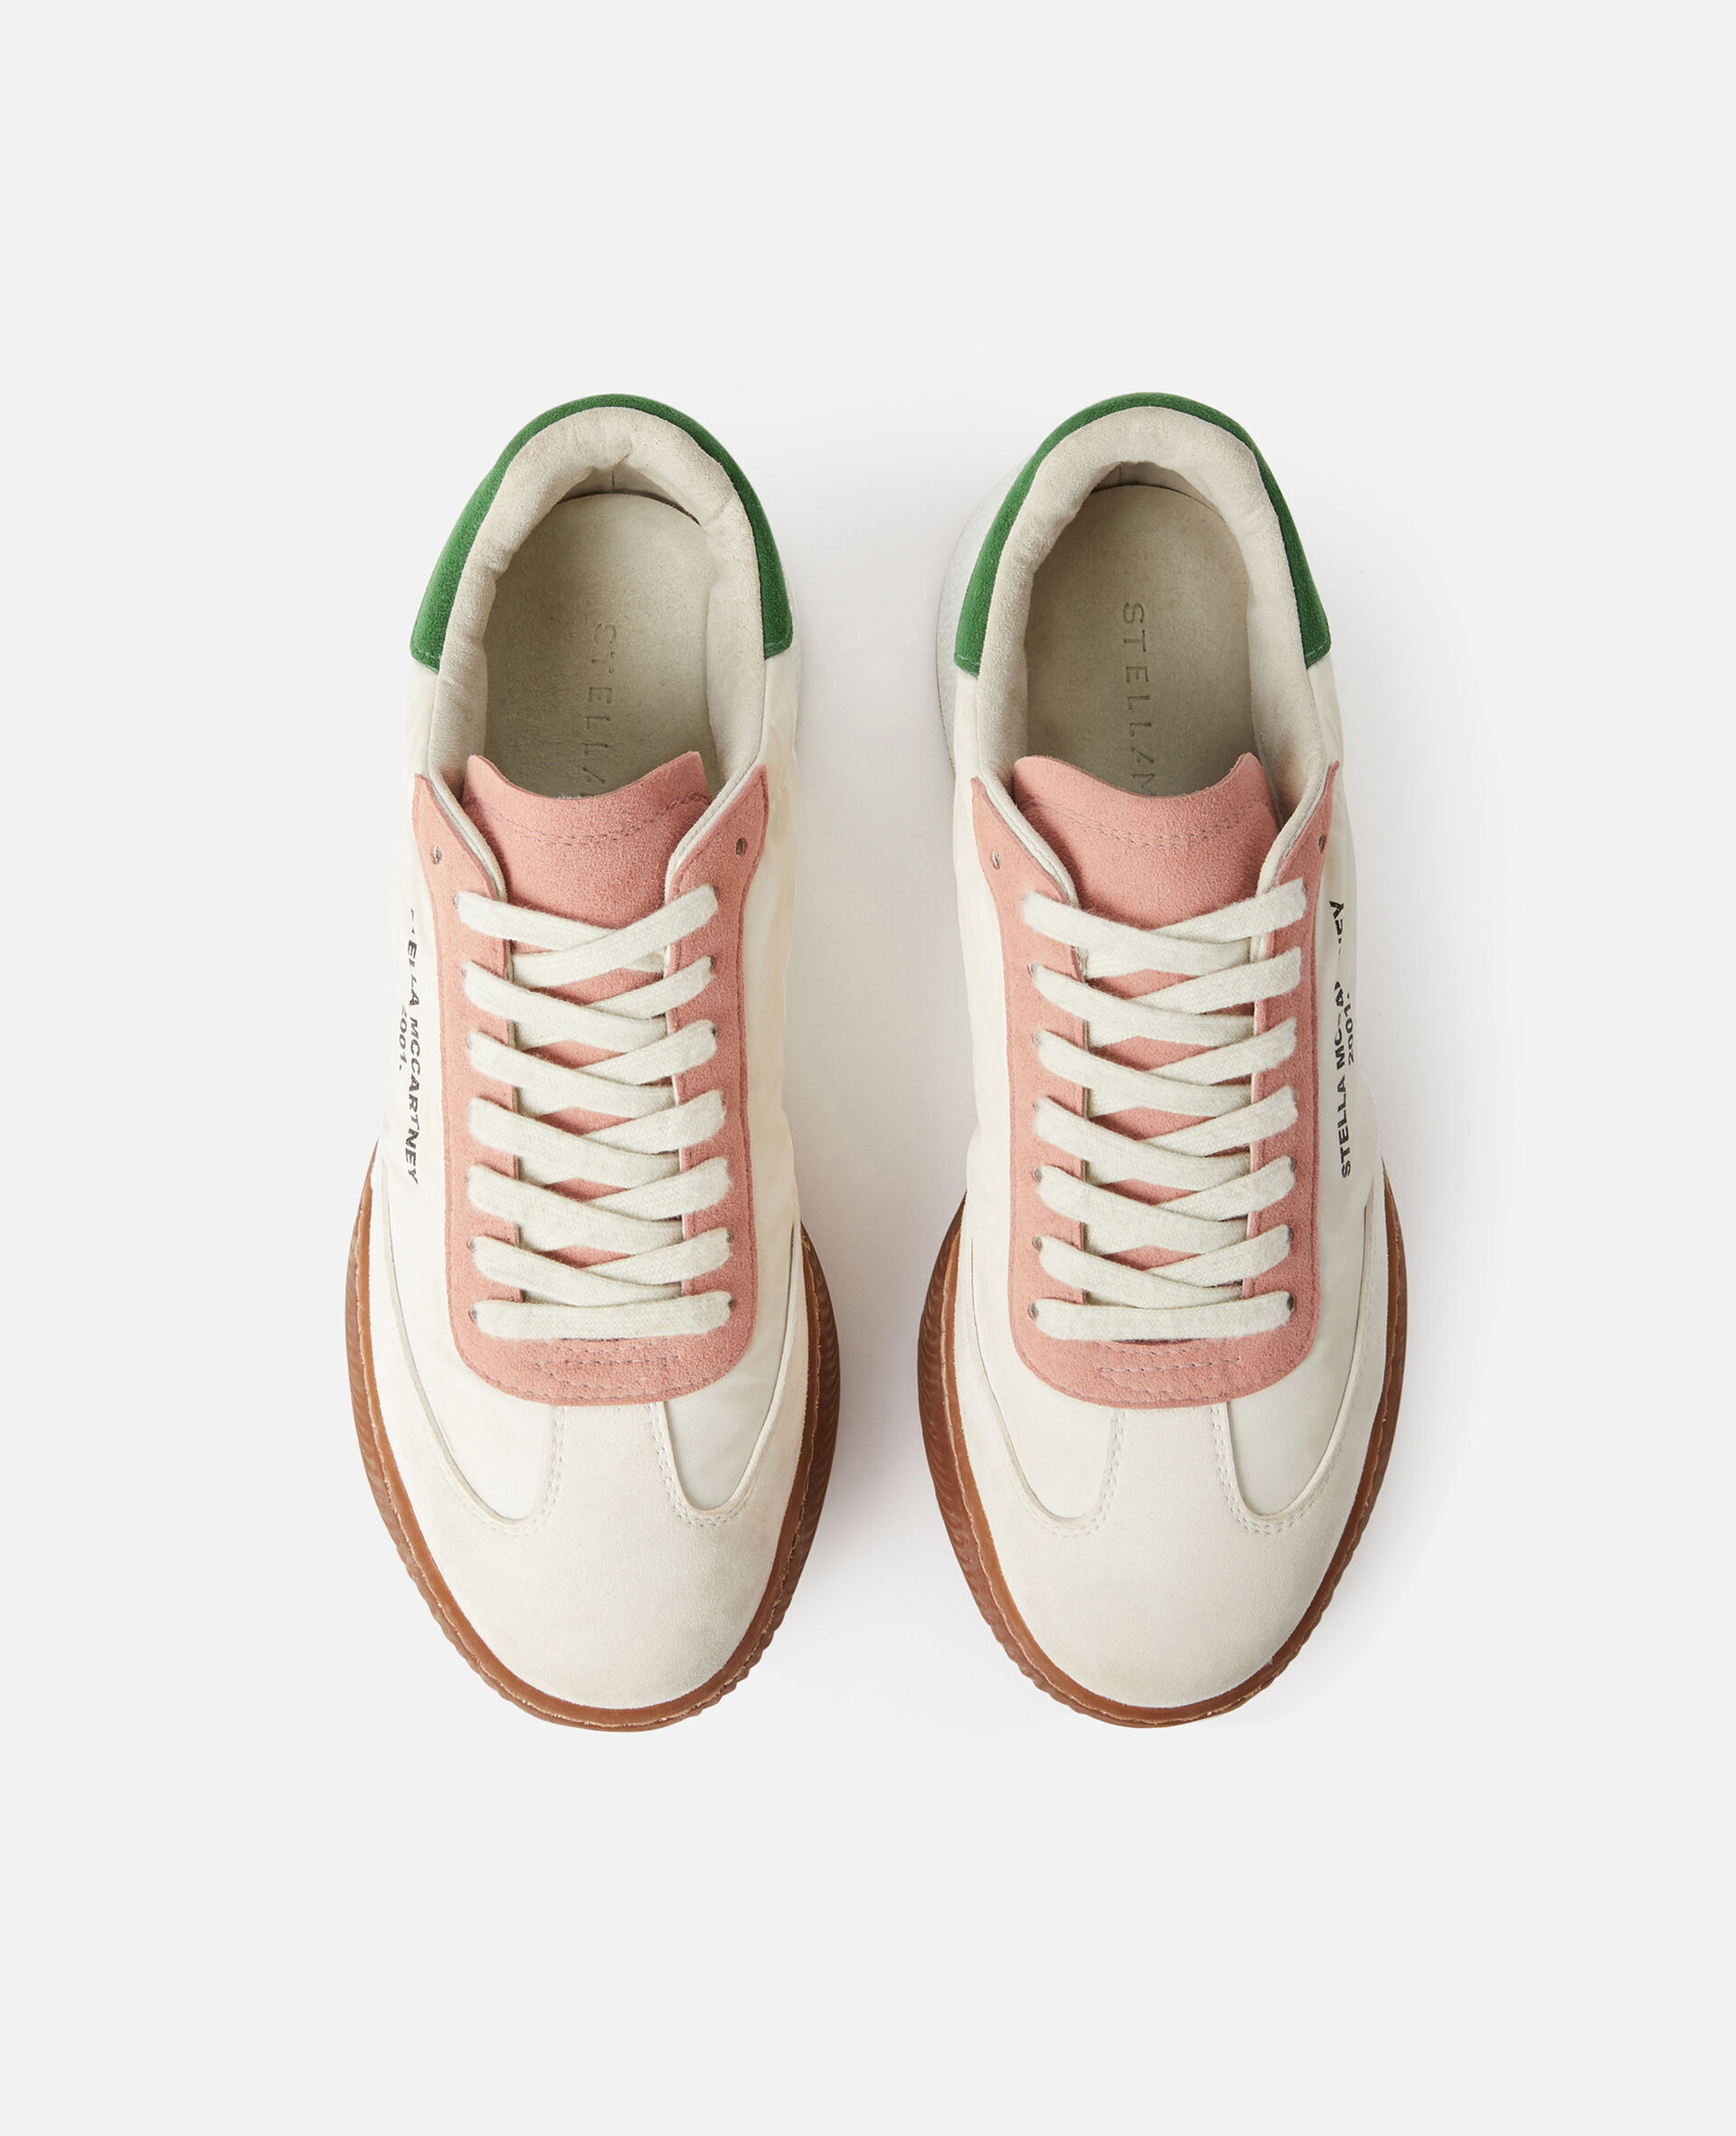 Loop Lace-up Sneakers-Multicolour-large image number 3